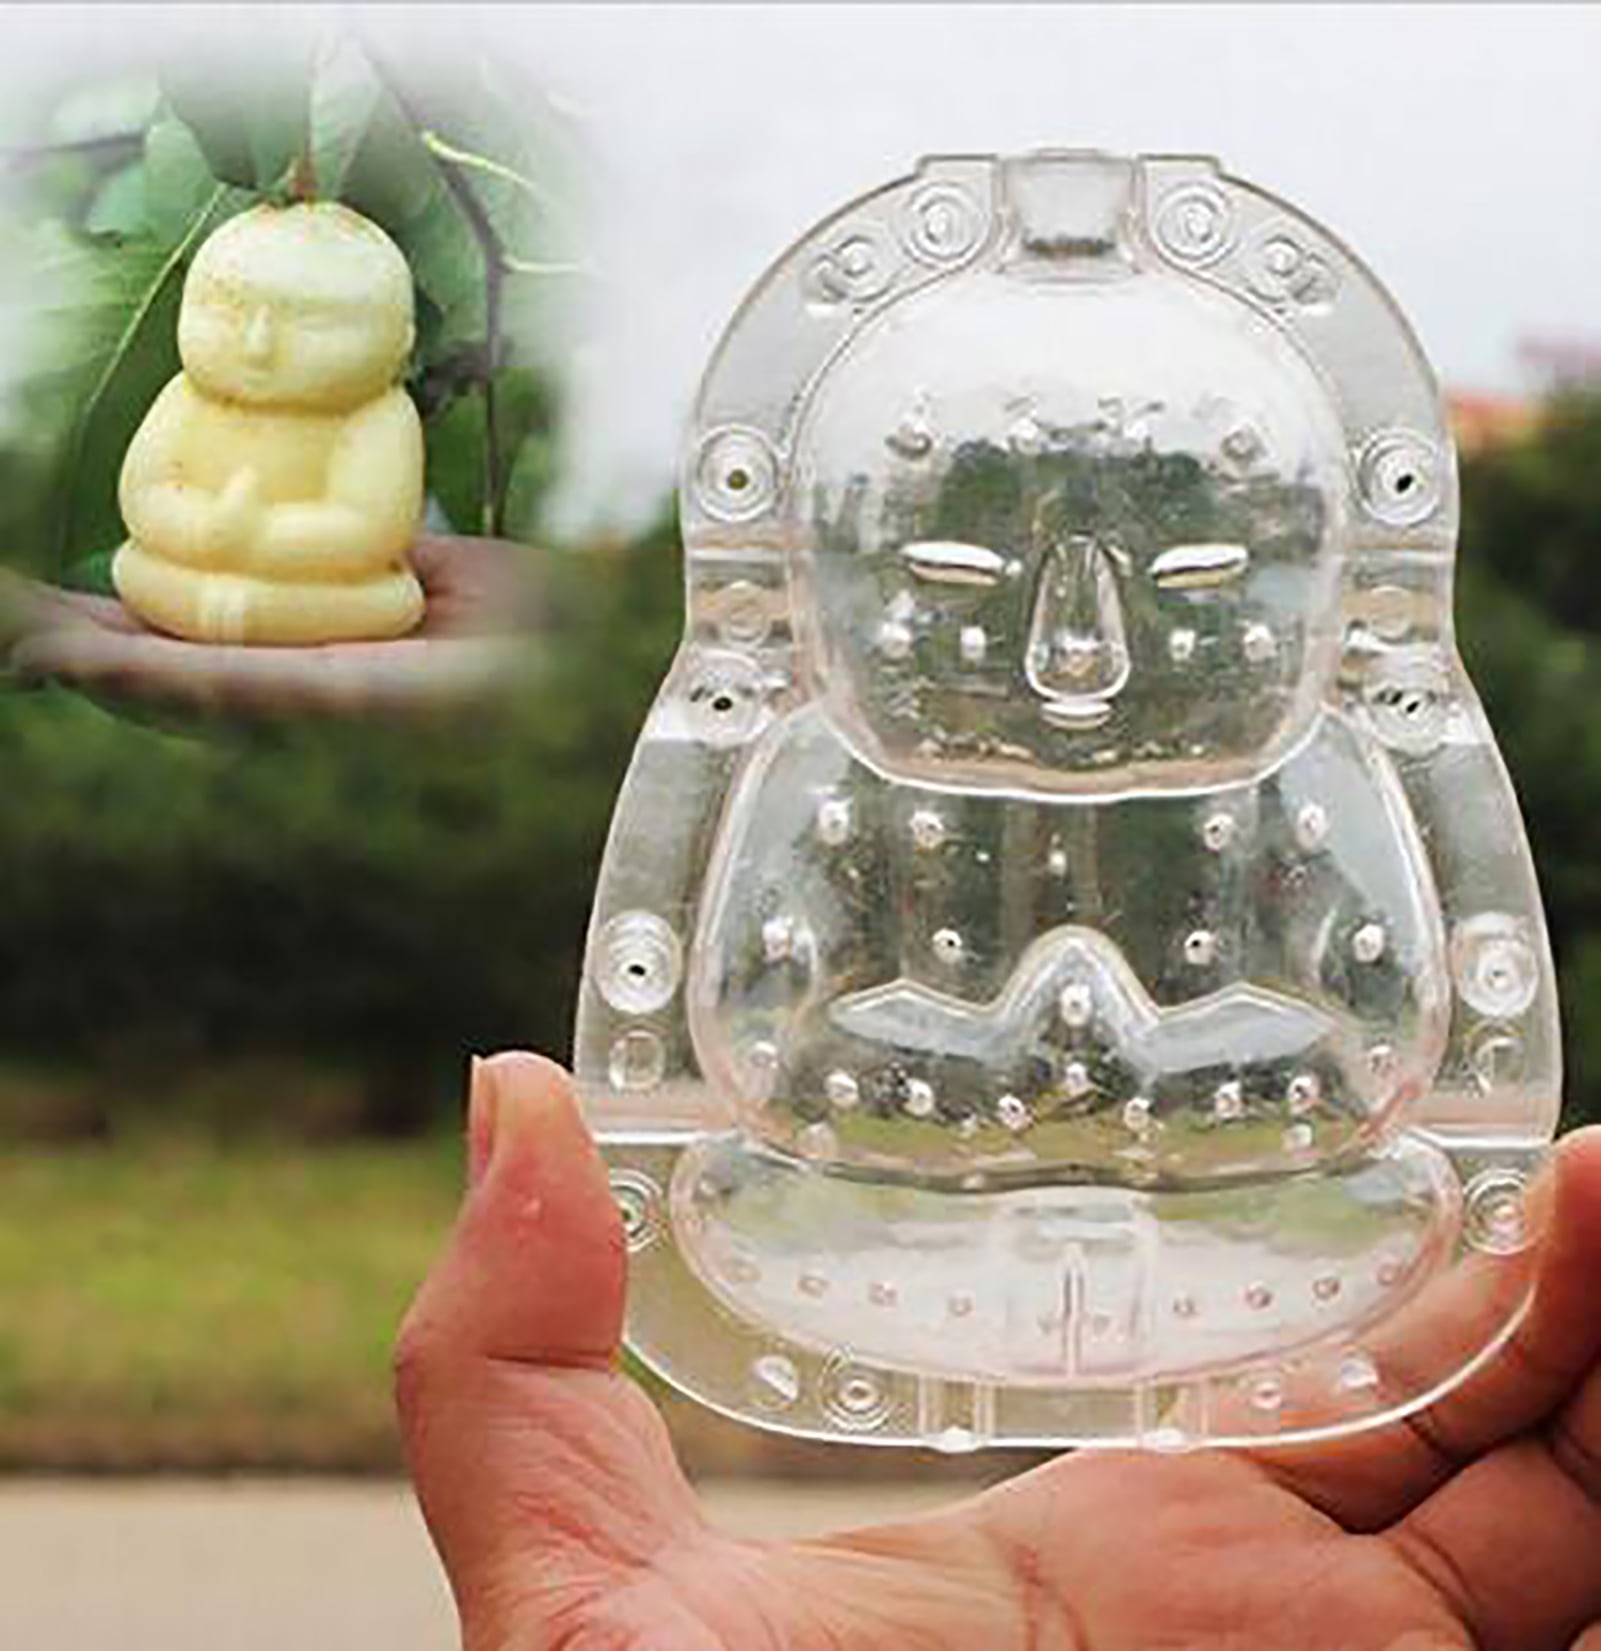 Buddha-shaped Fruits Shaping Mold Garden Pear Muskmelon etc Growth Forming Mold 